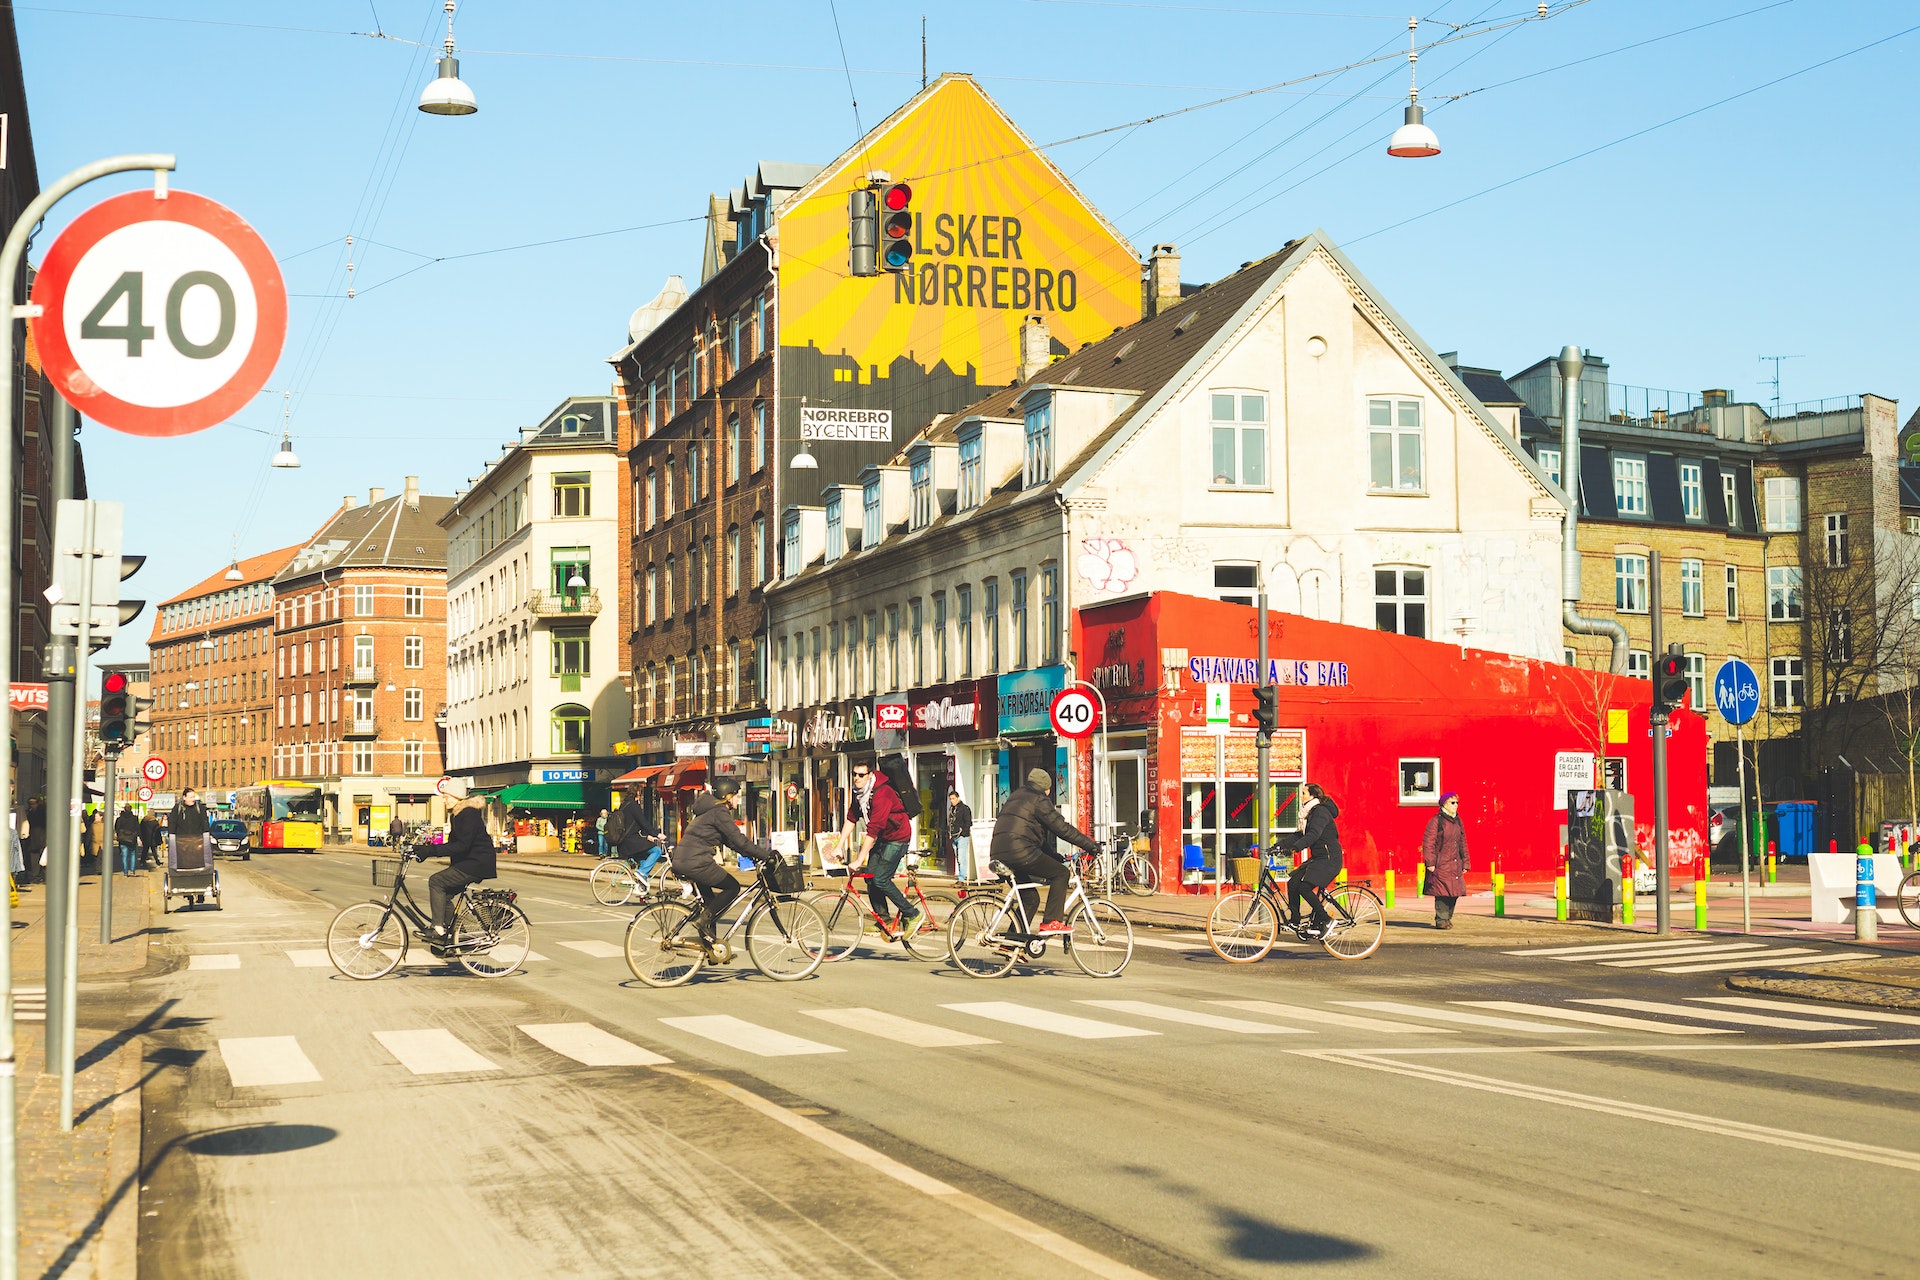 Cyclists ride through the hip streets of a city neighborhood, with independent shops and street art murals